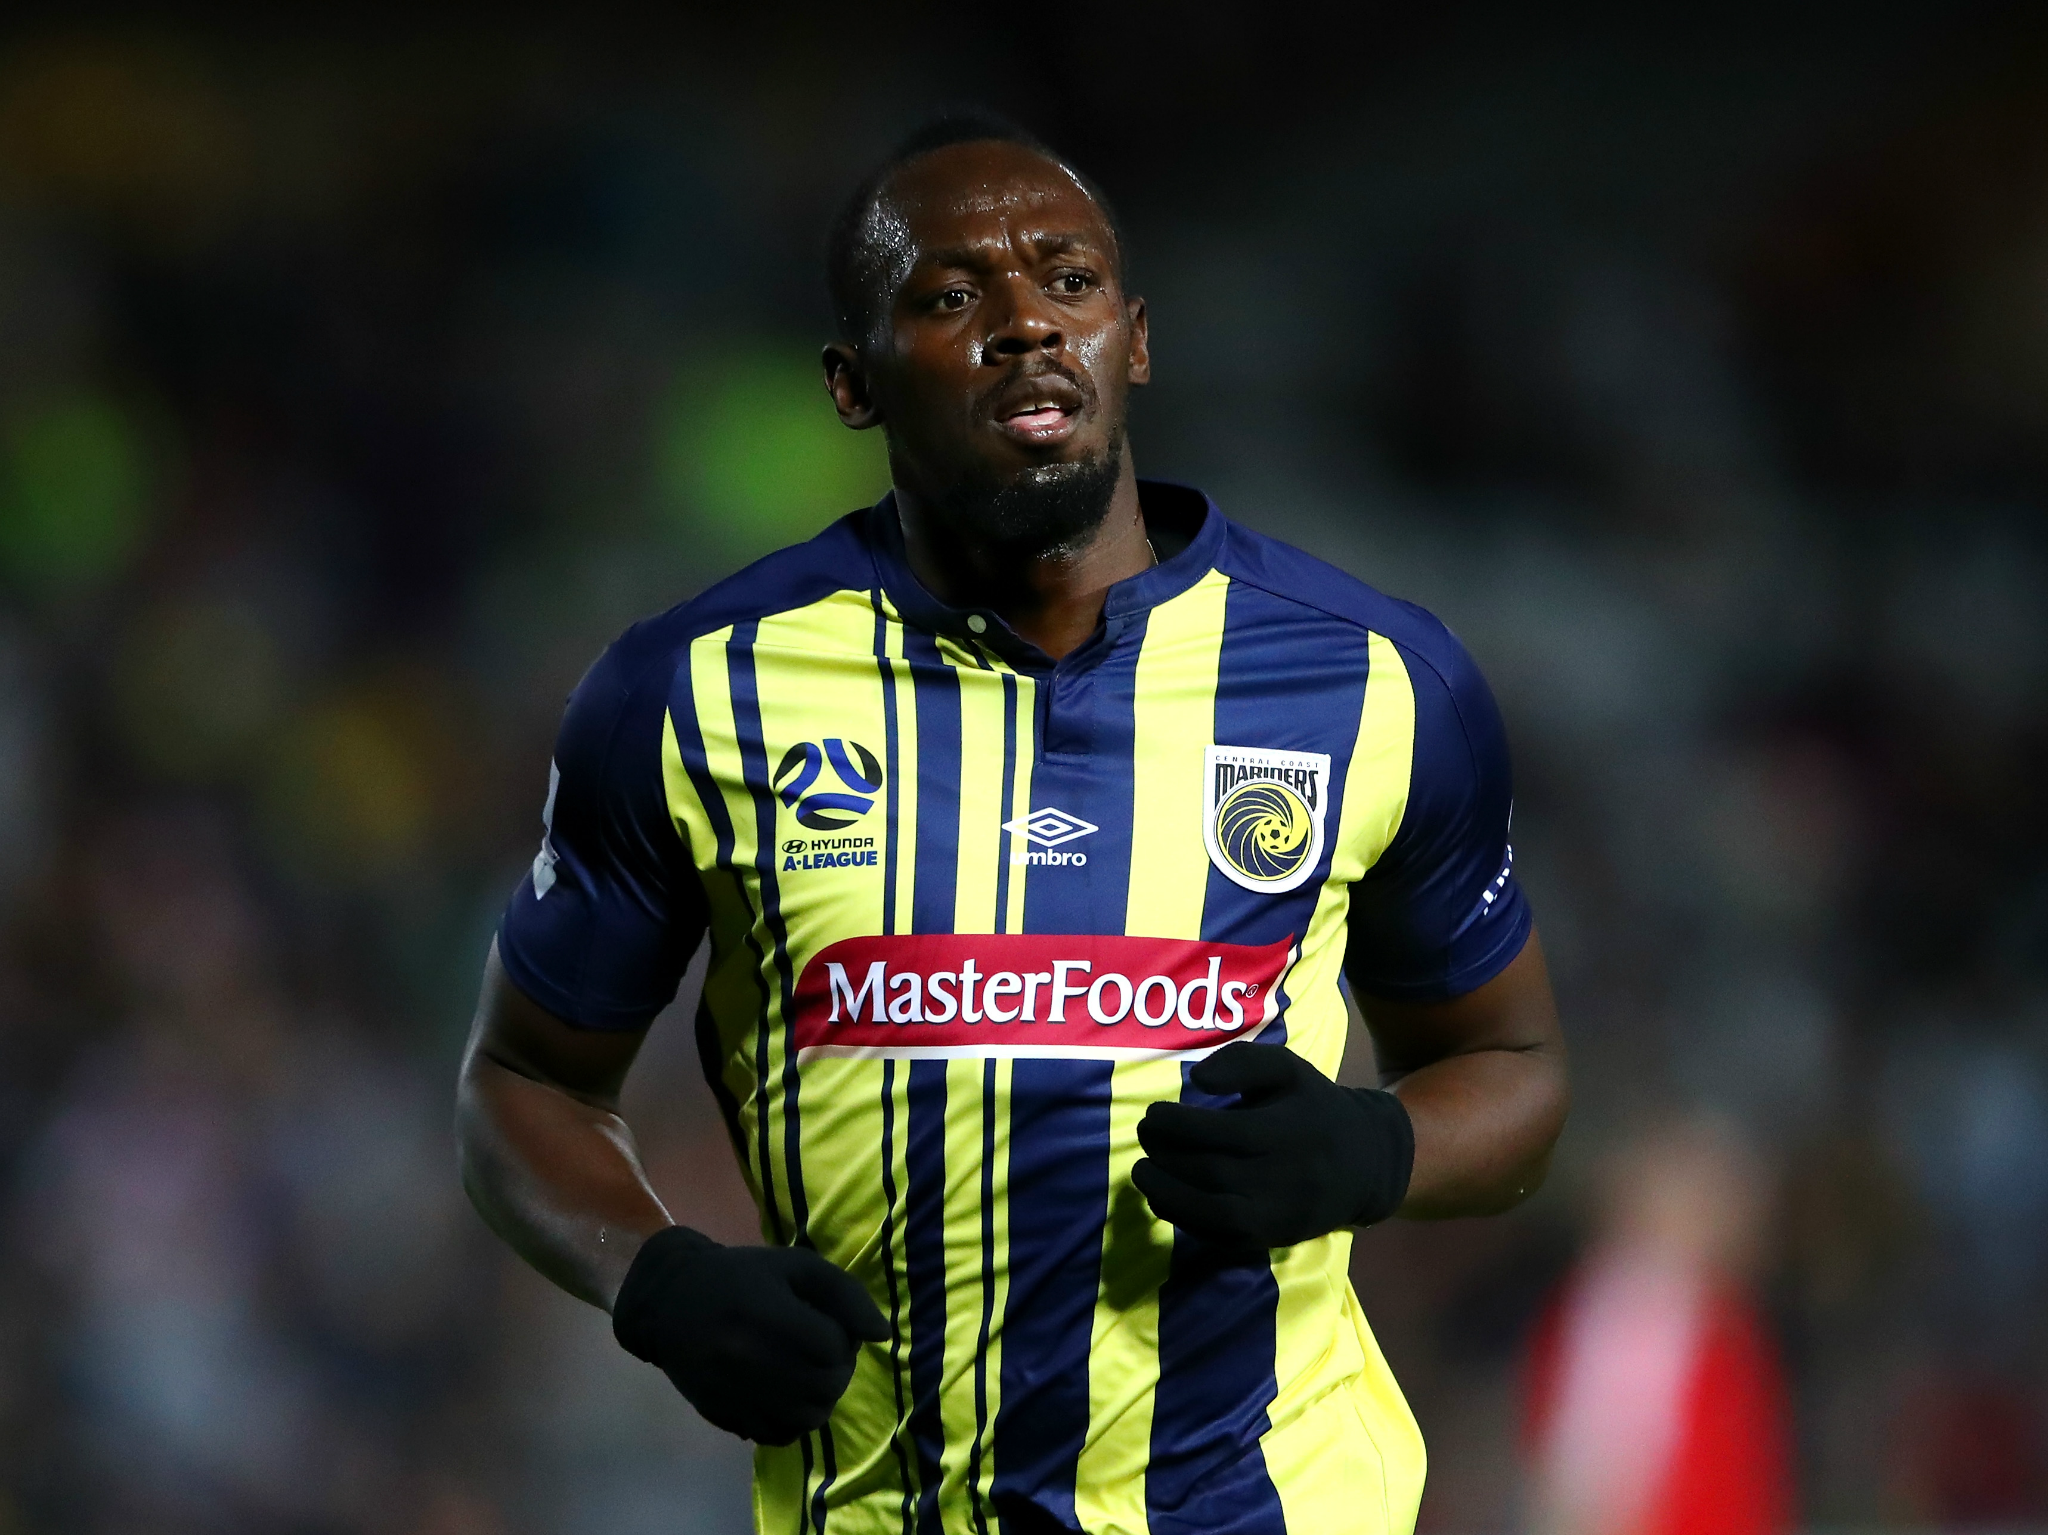 Bolt has been on trial with the Mariners since August